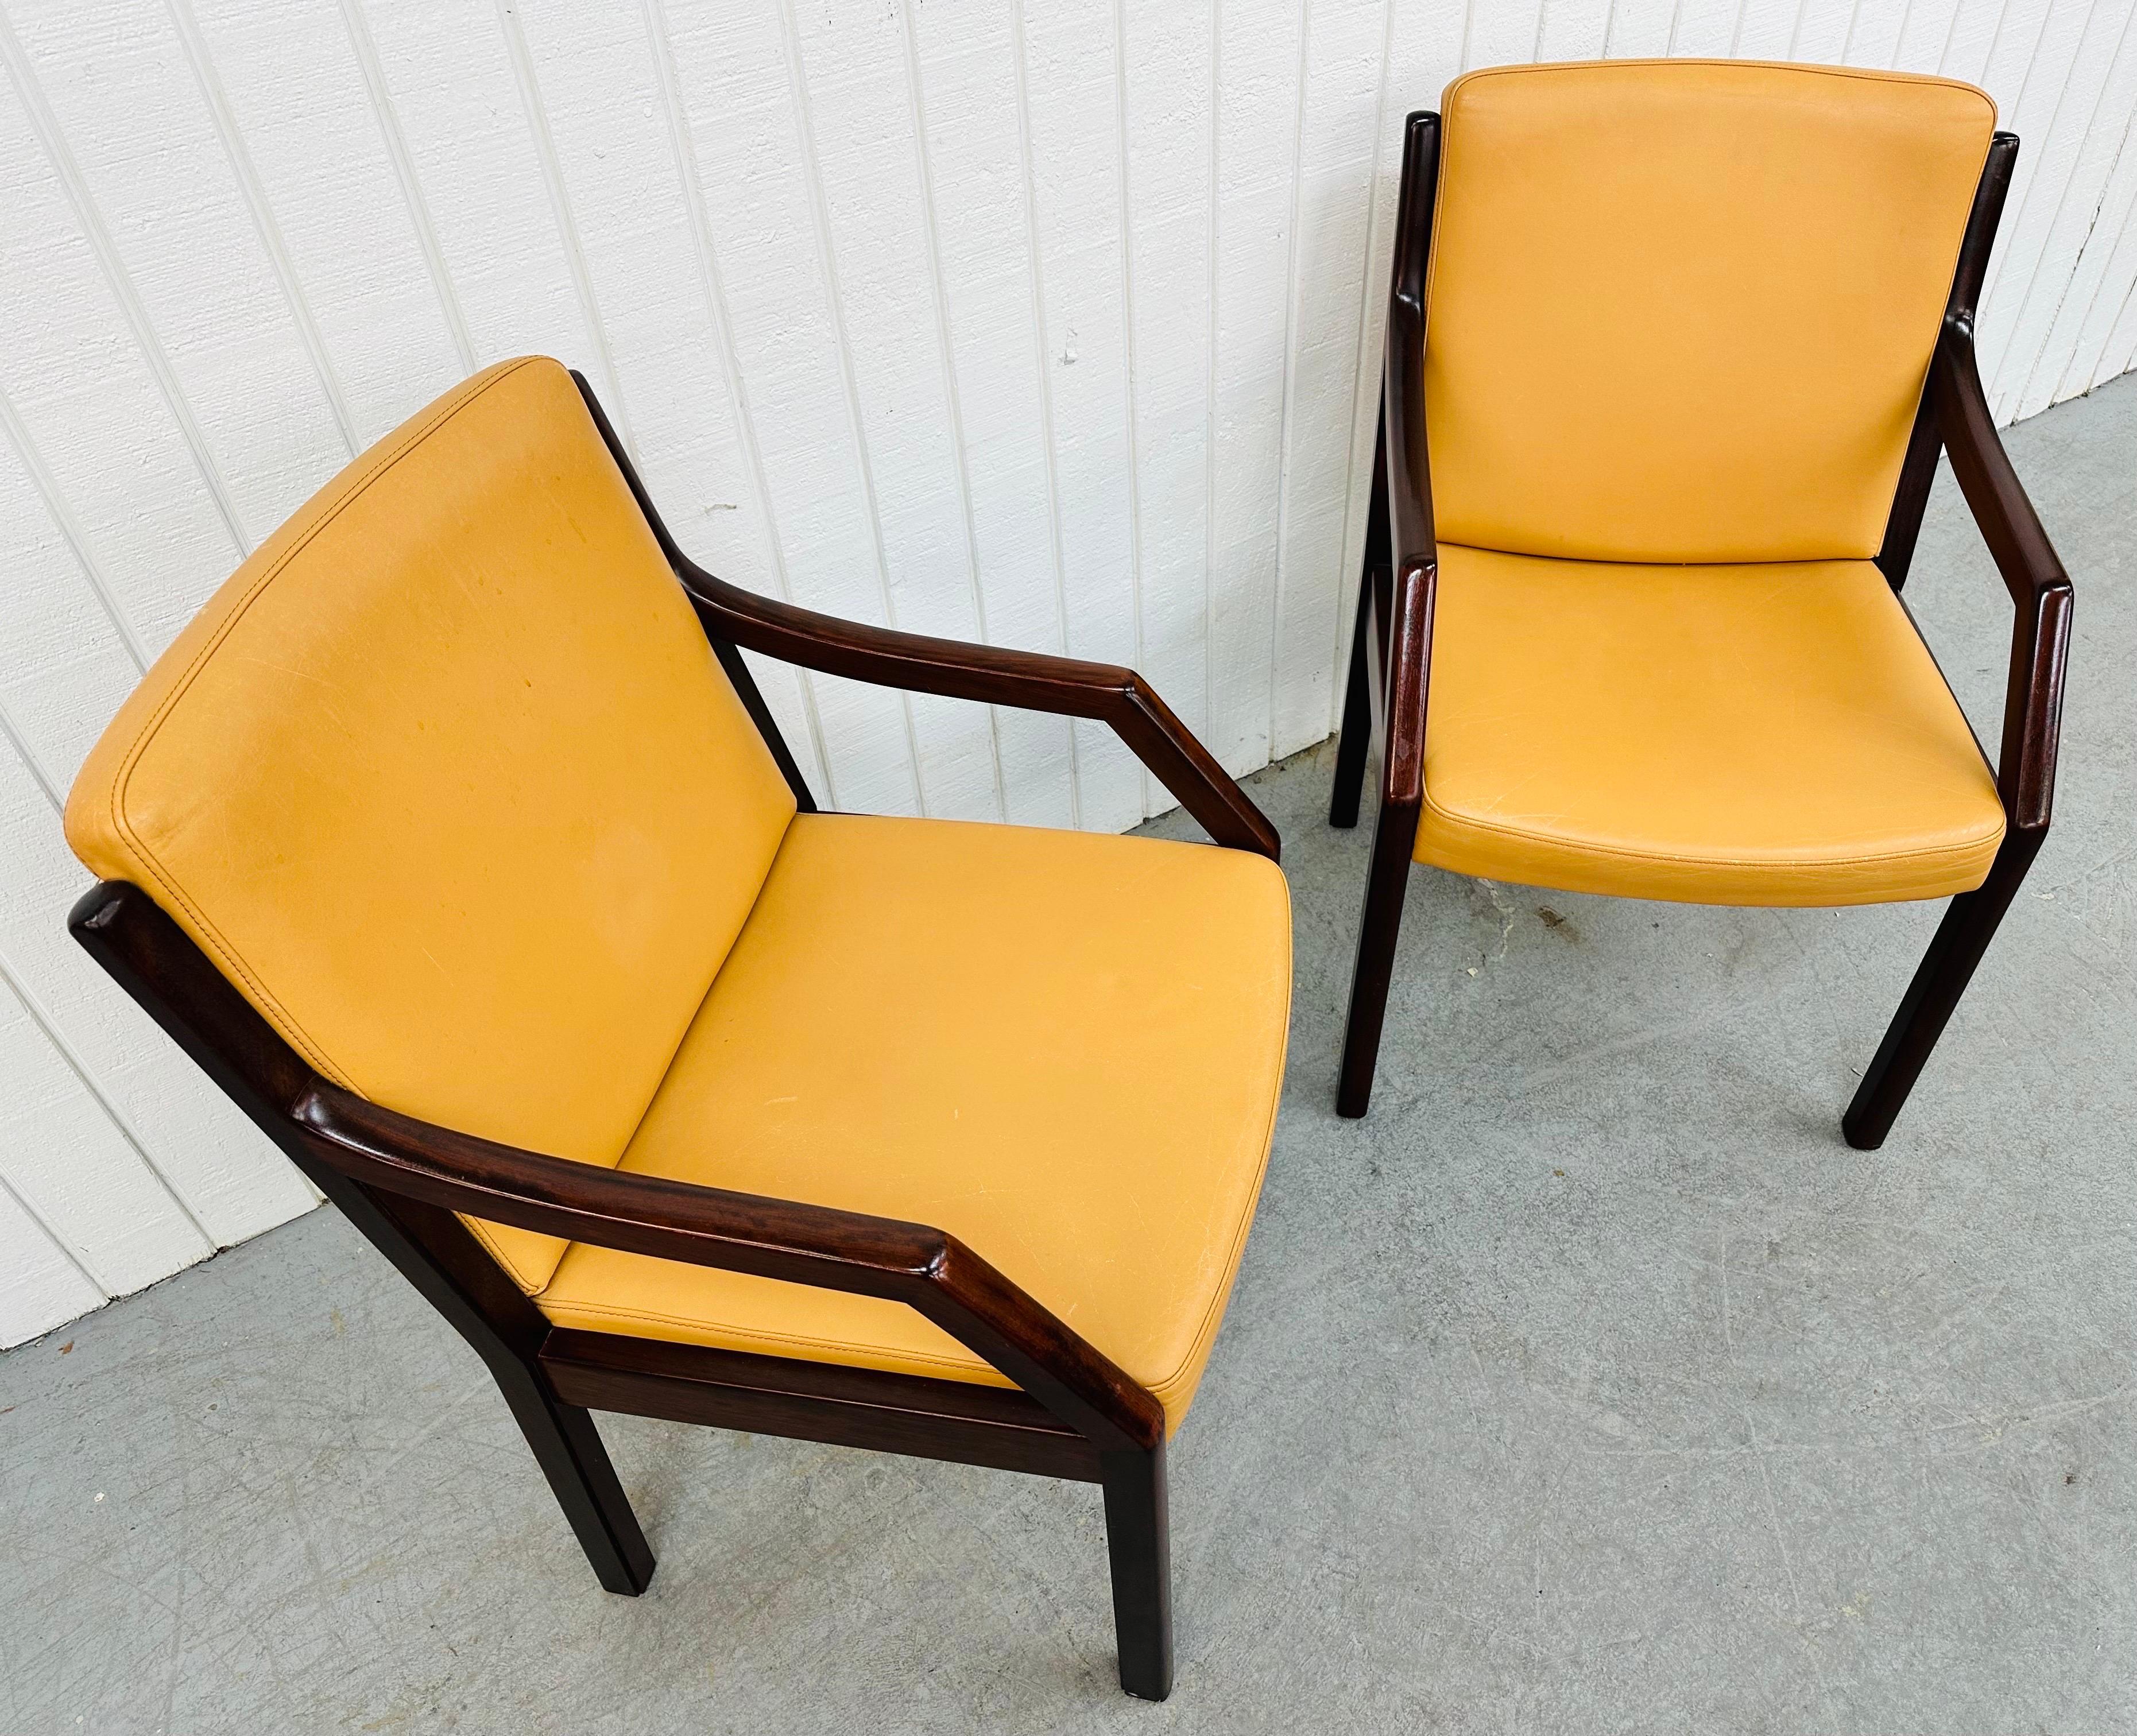 American Vintage Dunbar Style Lounge Chairs - Set of 2 For Sale